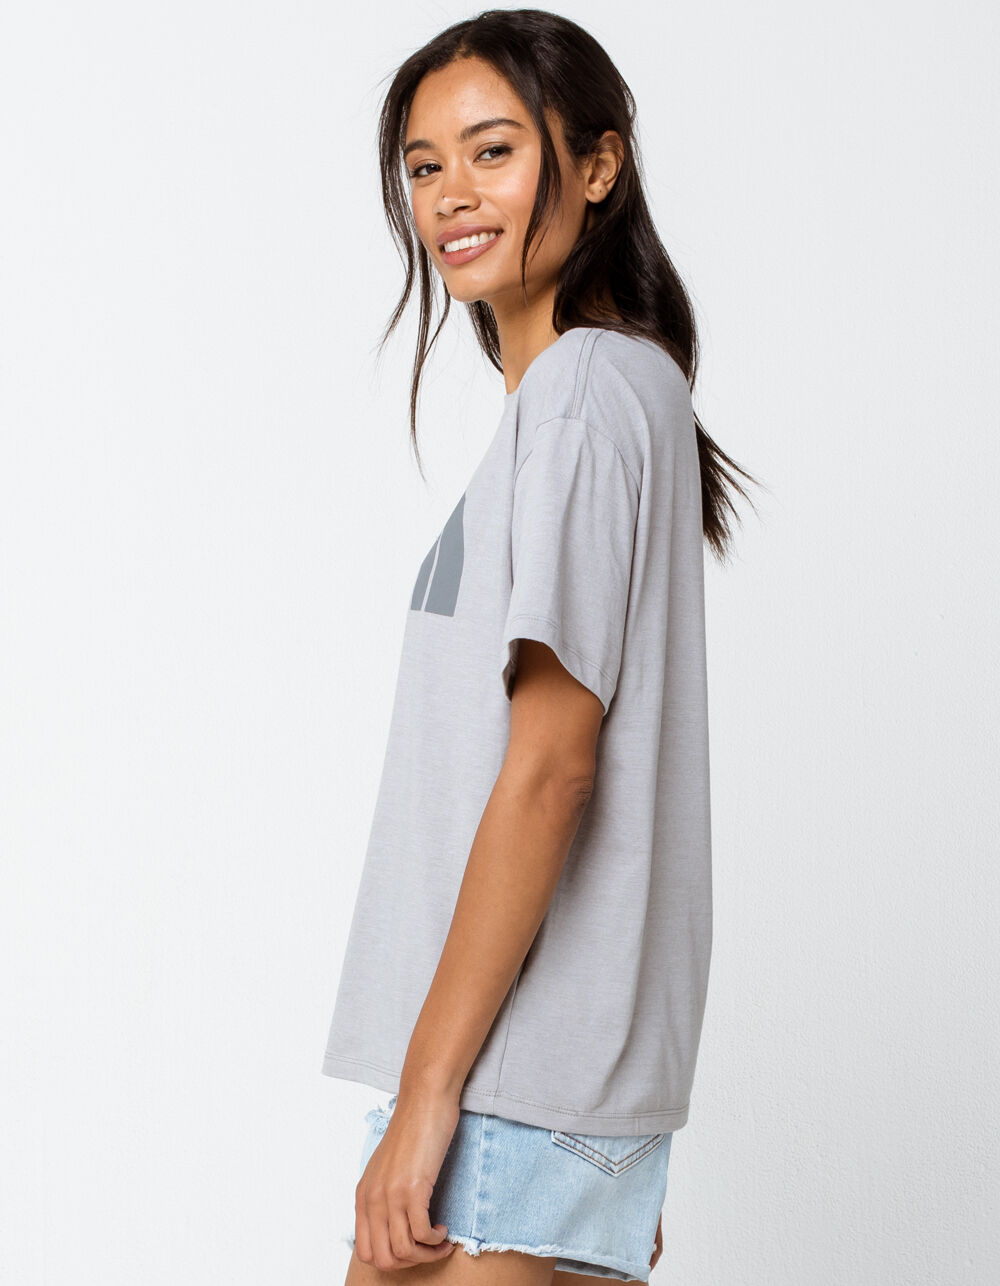 THE NORTH FACE Half Dome Tri Blend Womens Tee - HEATHER GRAY | Tillys